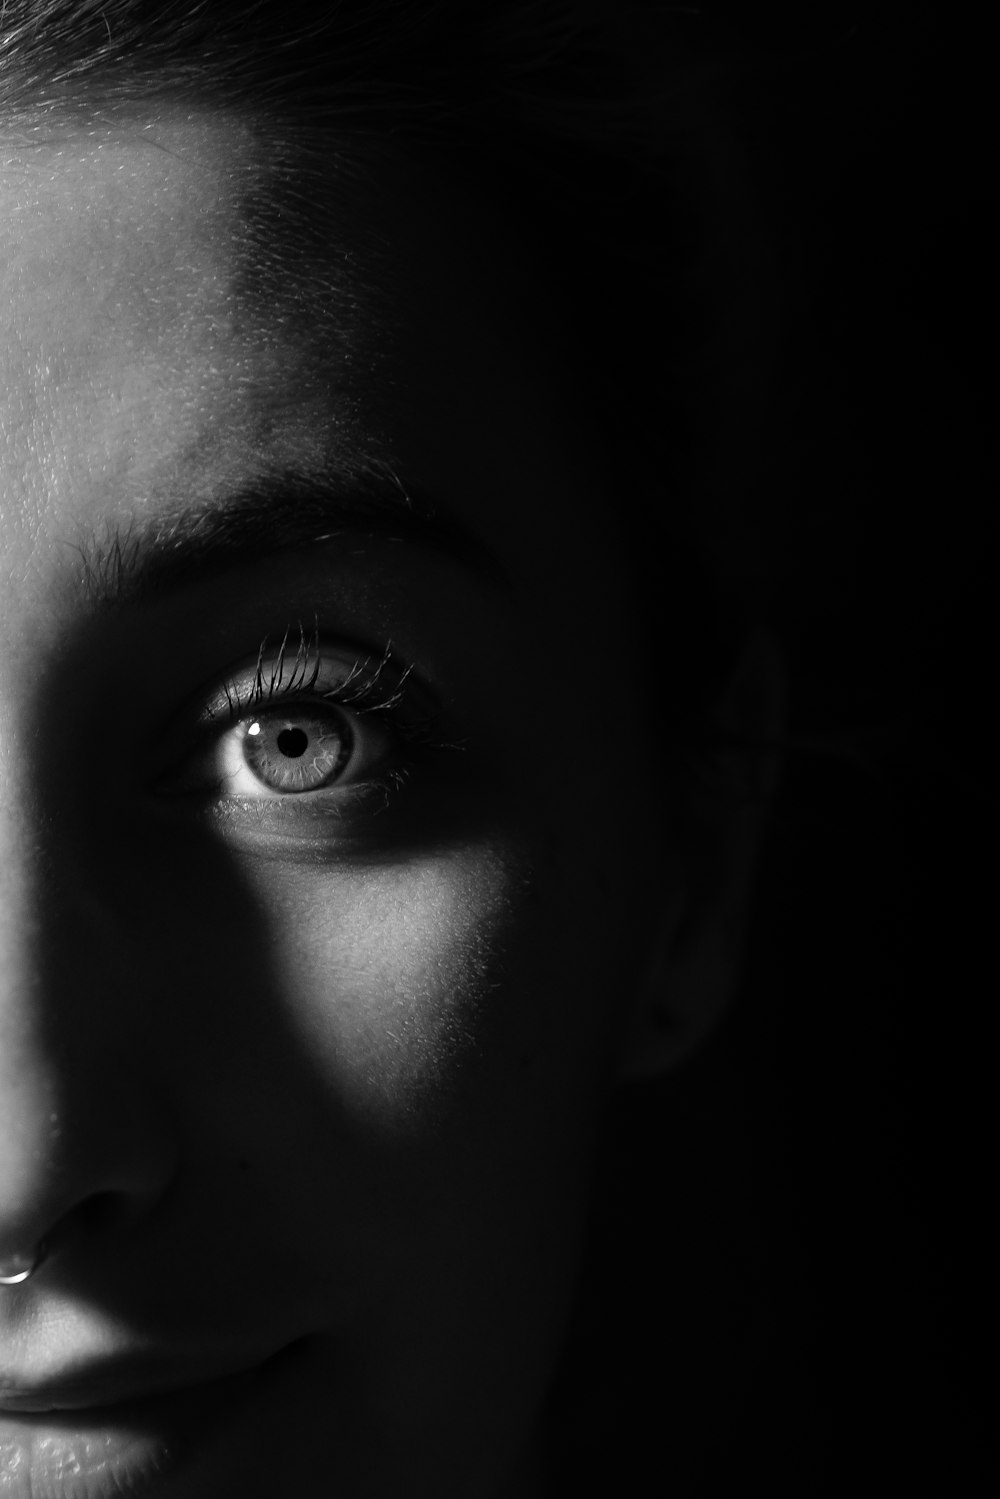 grayscale photo of persons eye